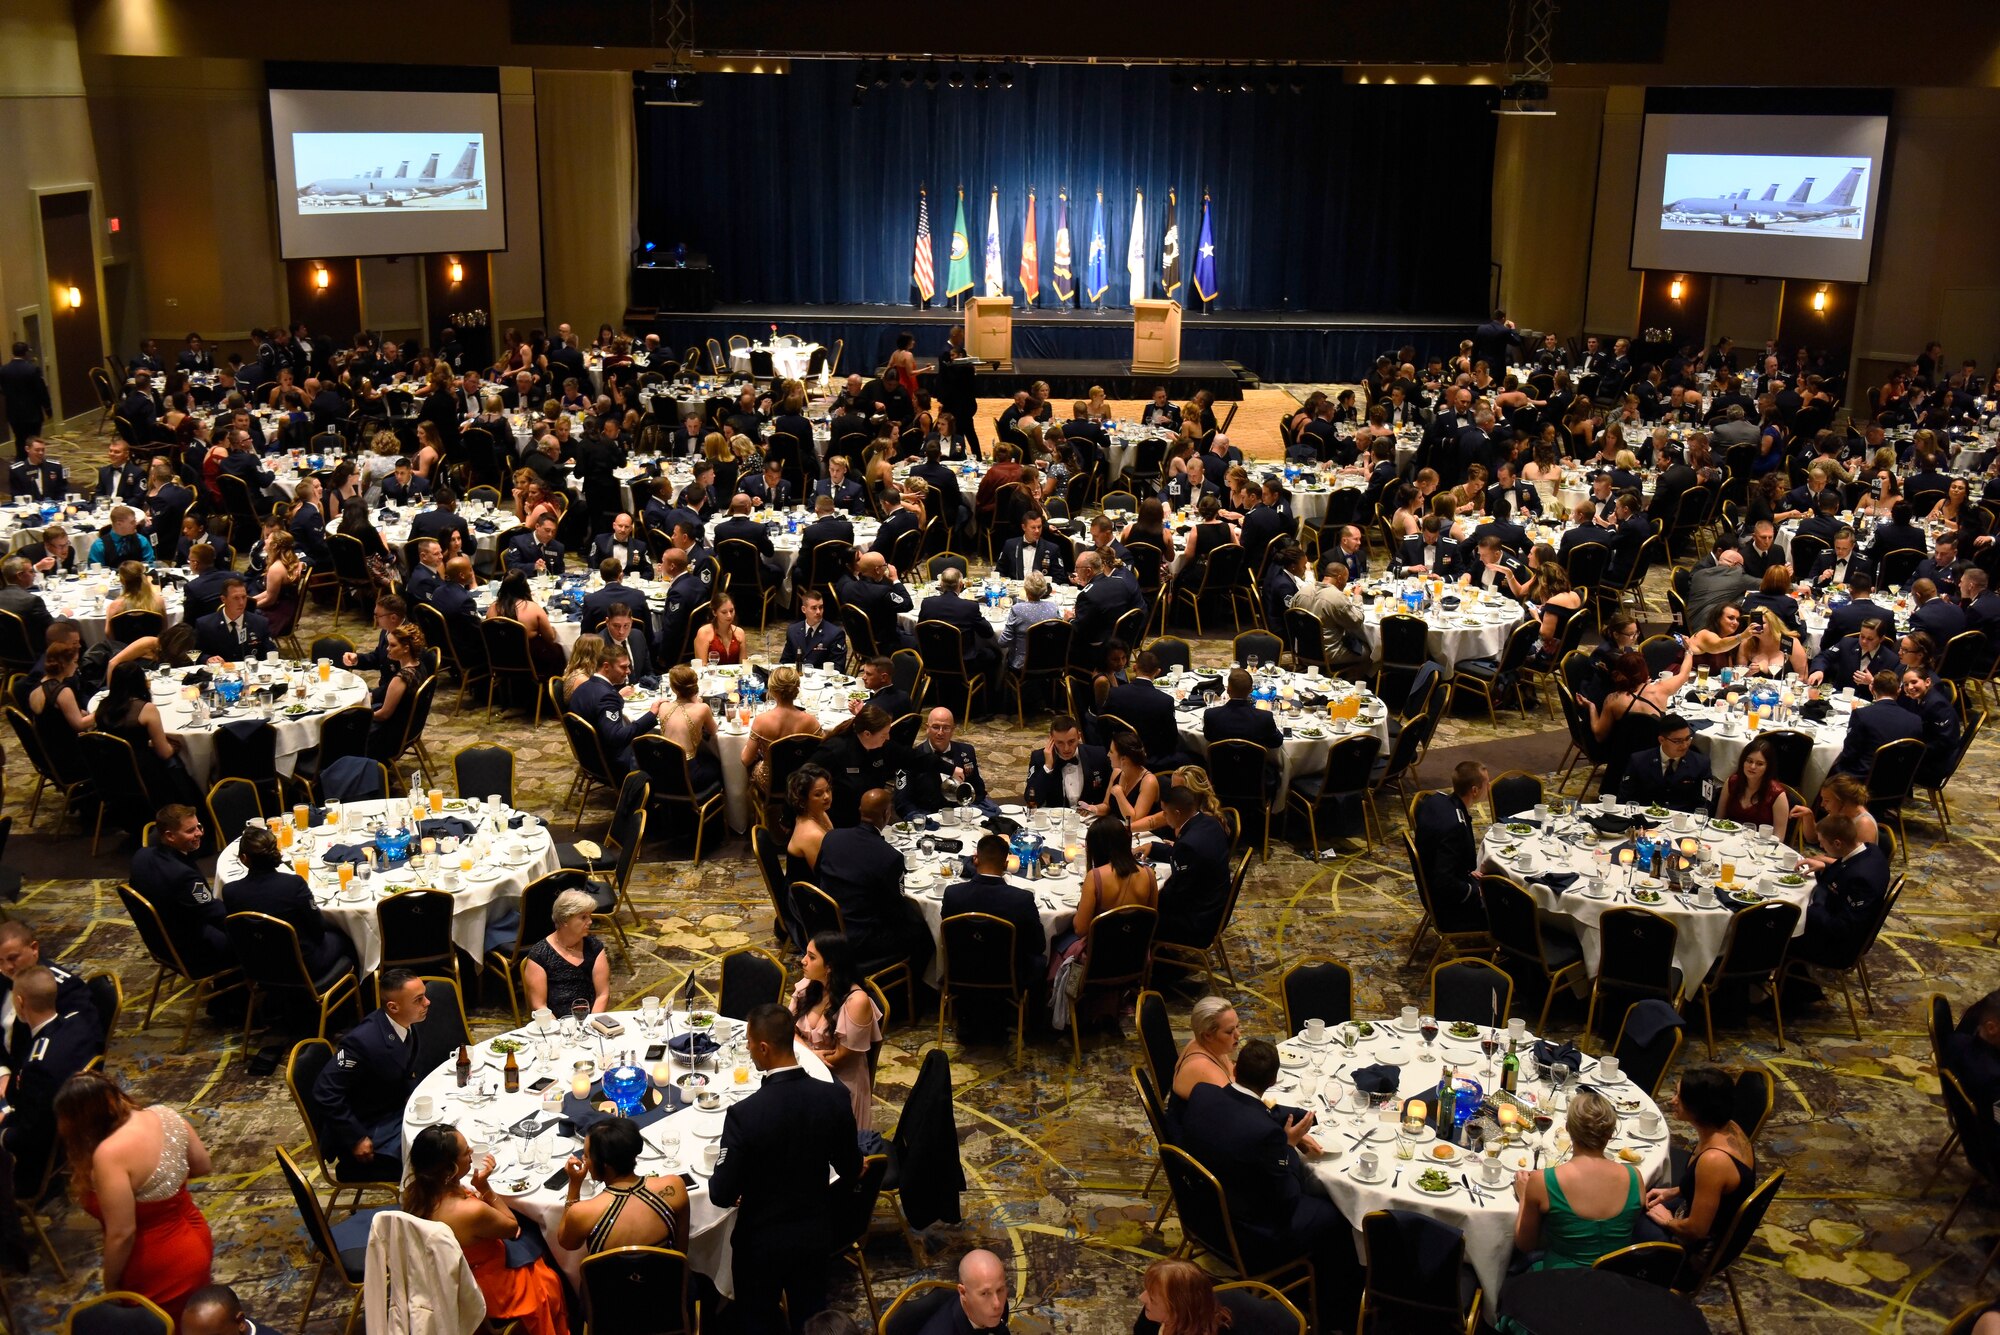 Military and civilian attendees gather to celebrate Fairchild's Air Force Ball at Northern Quest Resort and Casino in Airway Heights, Washington, Sept. 15, 2018.  The ball commemorated the 71st birthday of the Air Force, as well as the 60th anniversary of the first KC-135 Stratotanker at Fairchild. (U.S. Air Force photo/Airman 1st Class Lawrence Sena)